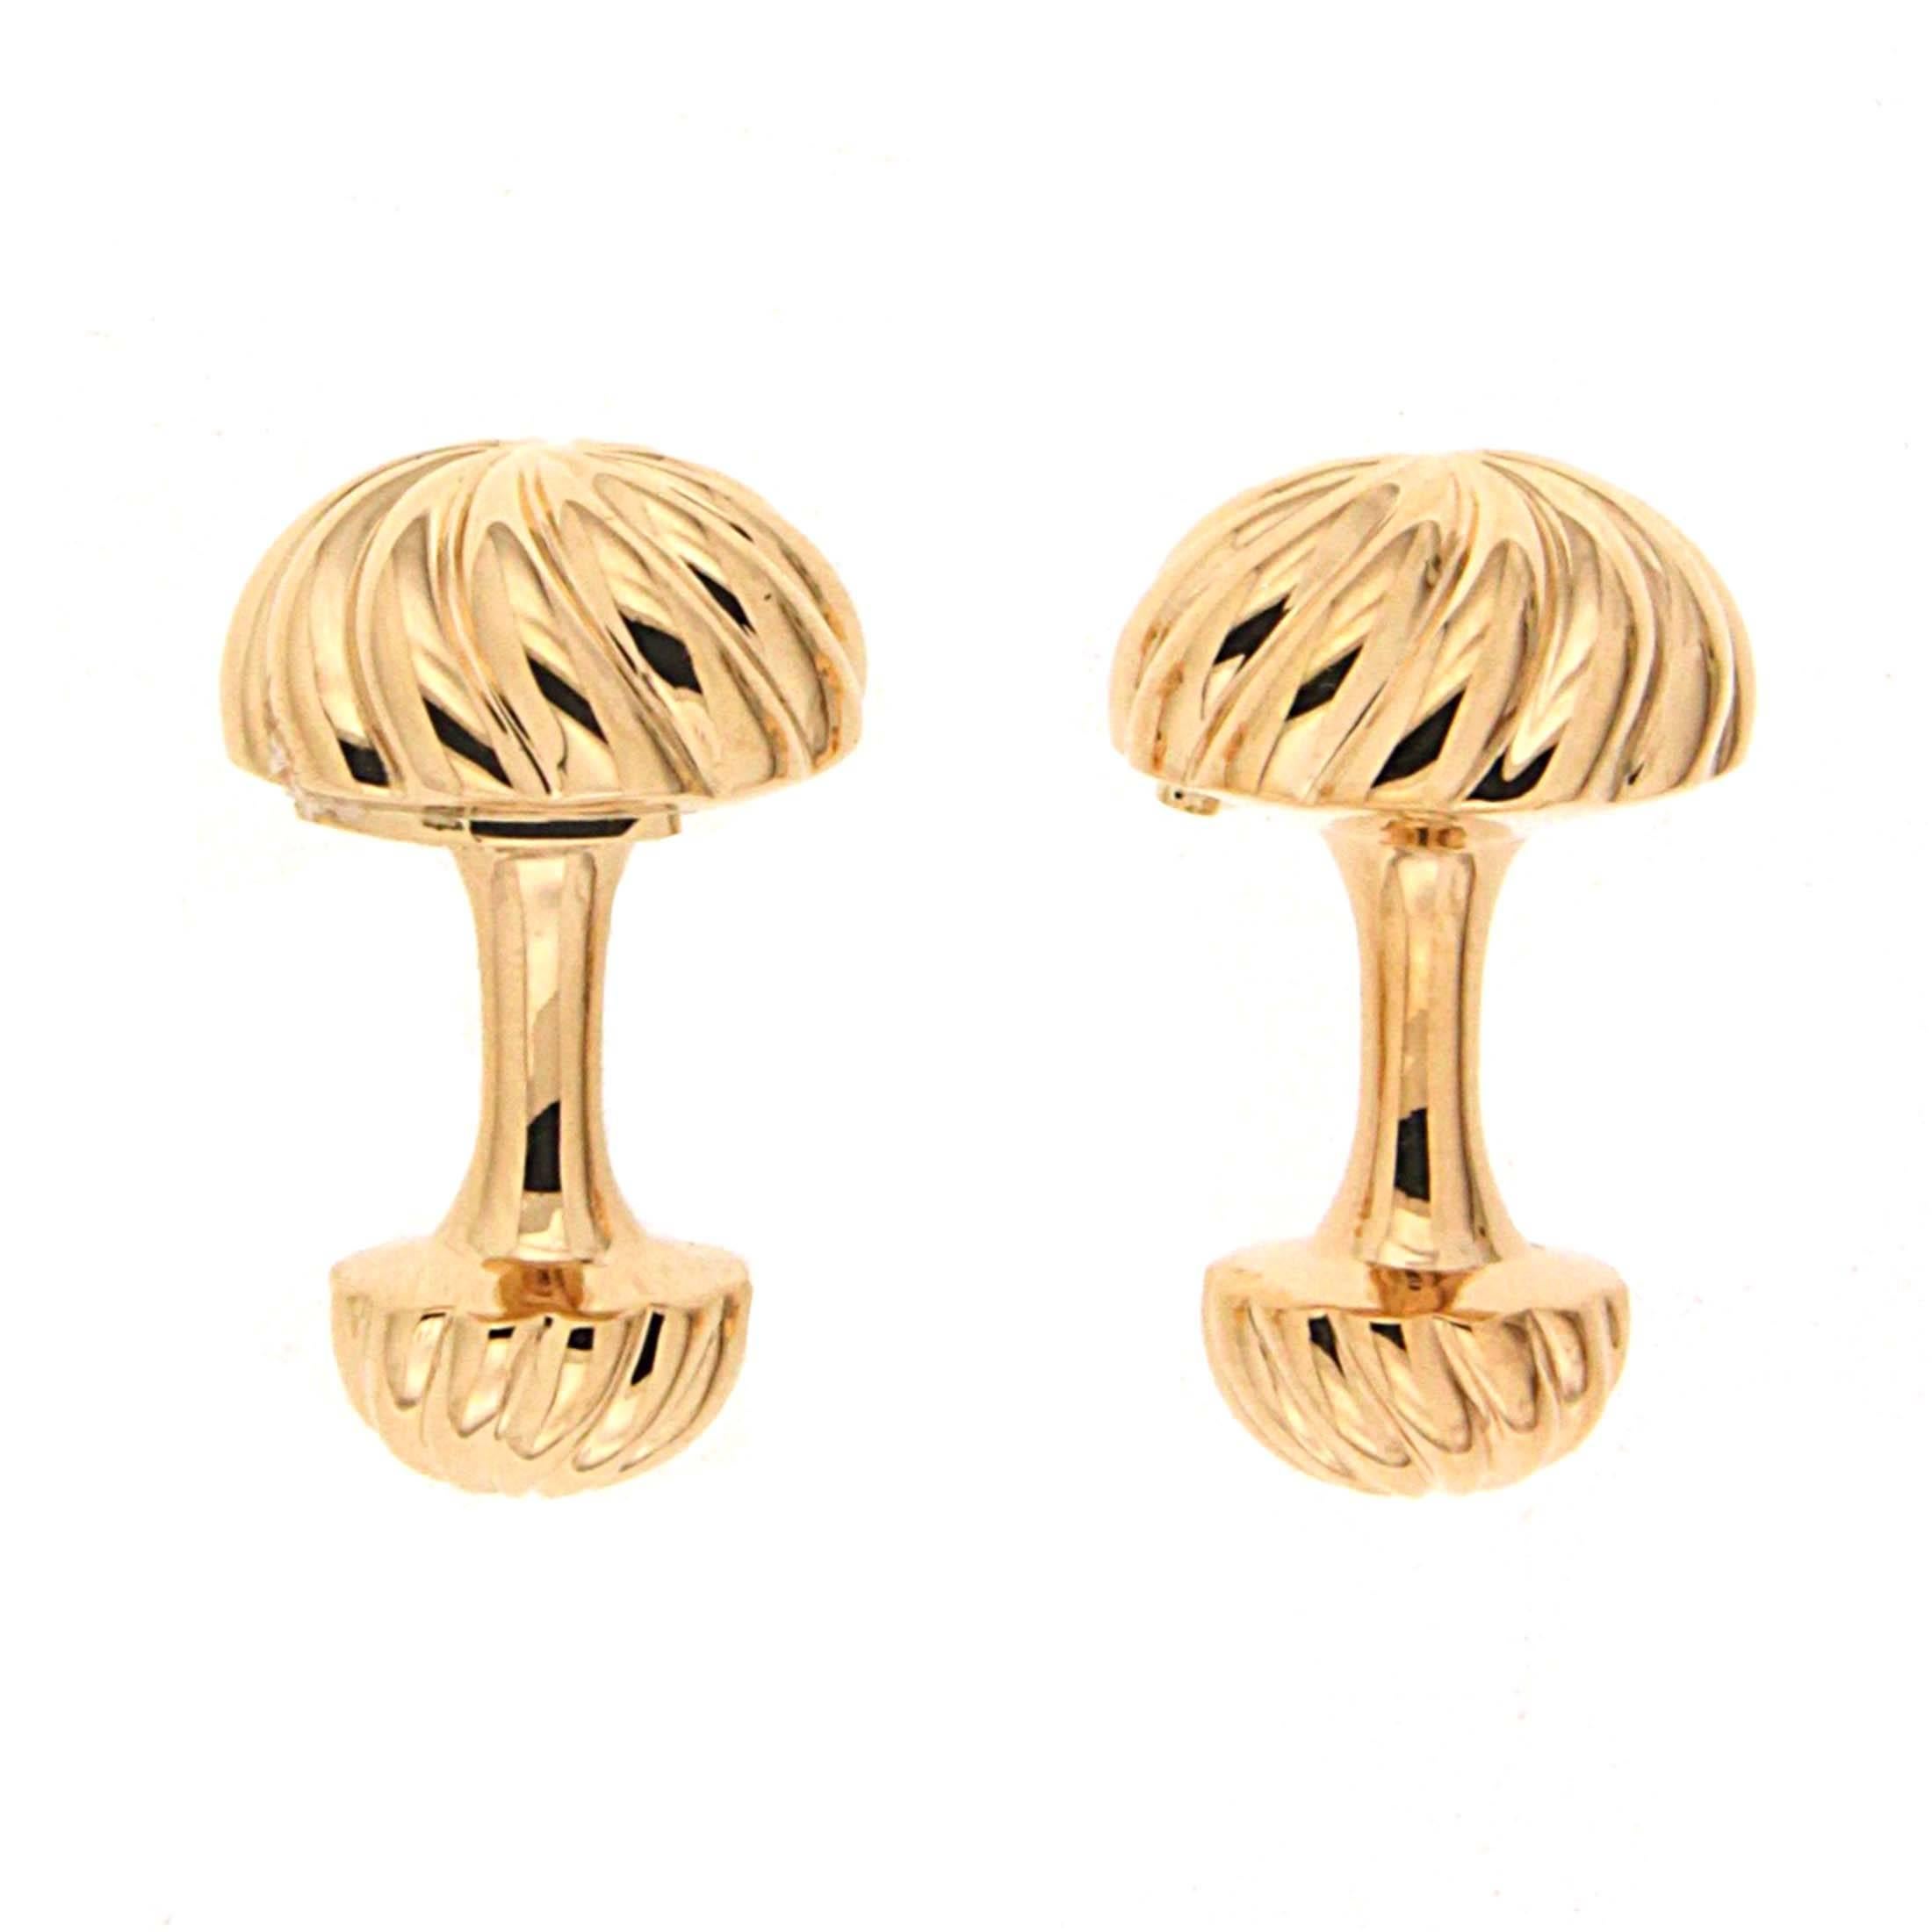 Textured 18k yellow gold is the highlight of these cufflinks. The motif is a fluted dome topped with a star shape. As the grooves travel downwards, they curve to make a swirl. A similar, smaller dome makes up the reverse side. In between is a